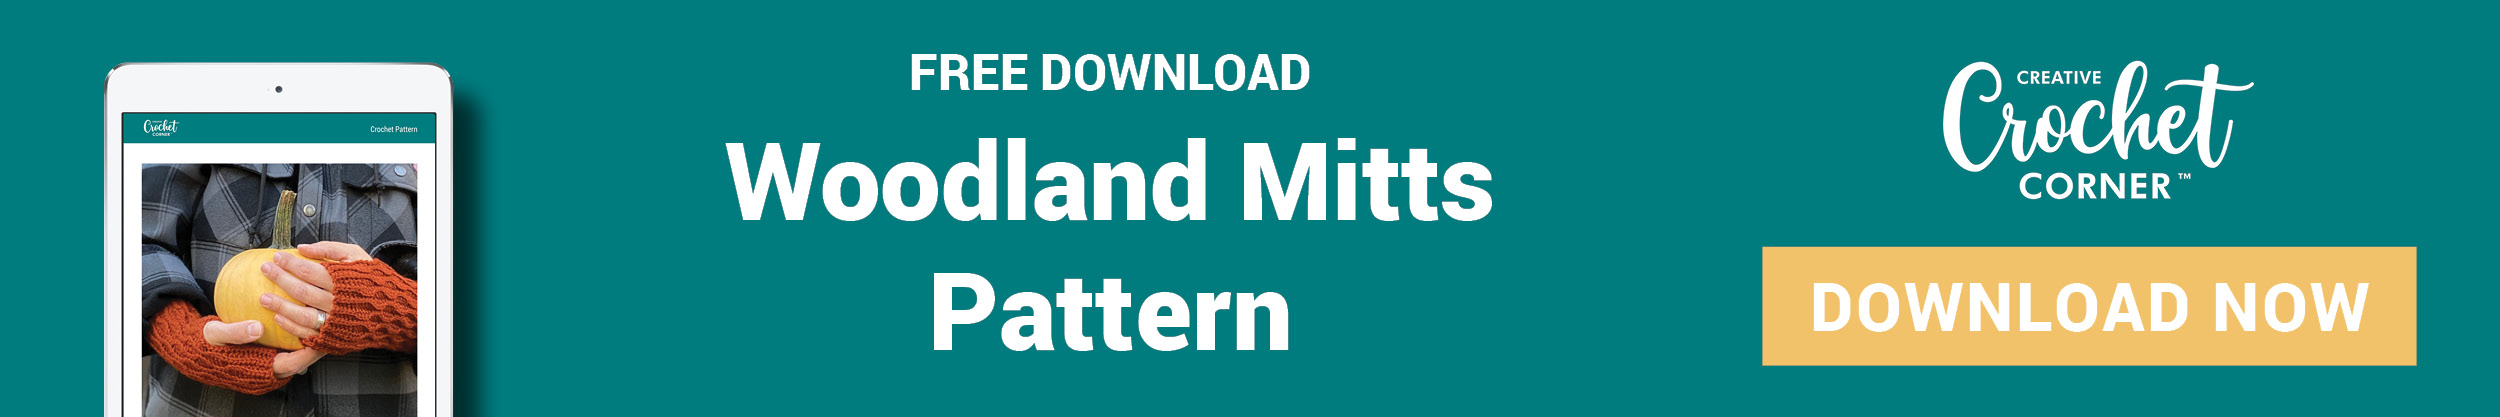 Click here to download the free woodland mitts pattern